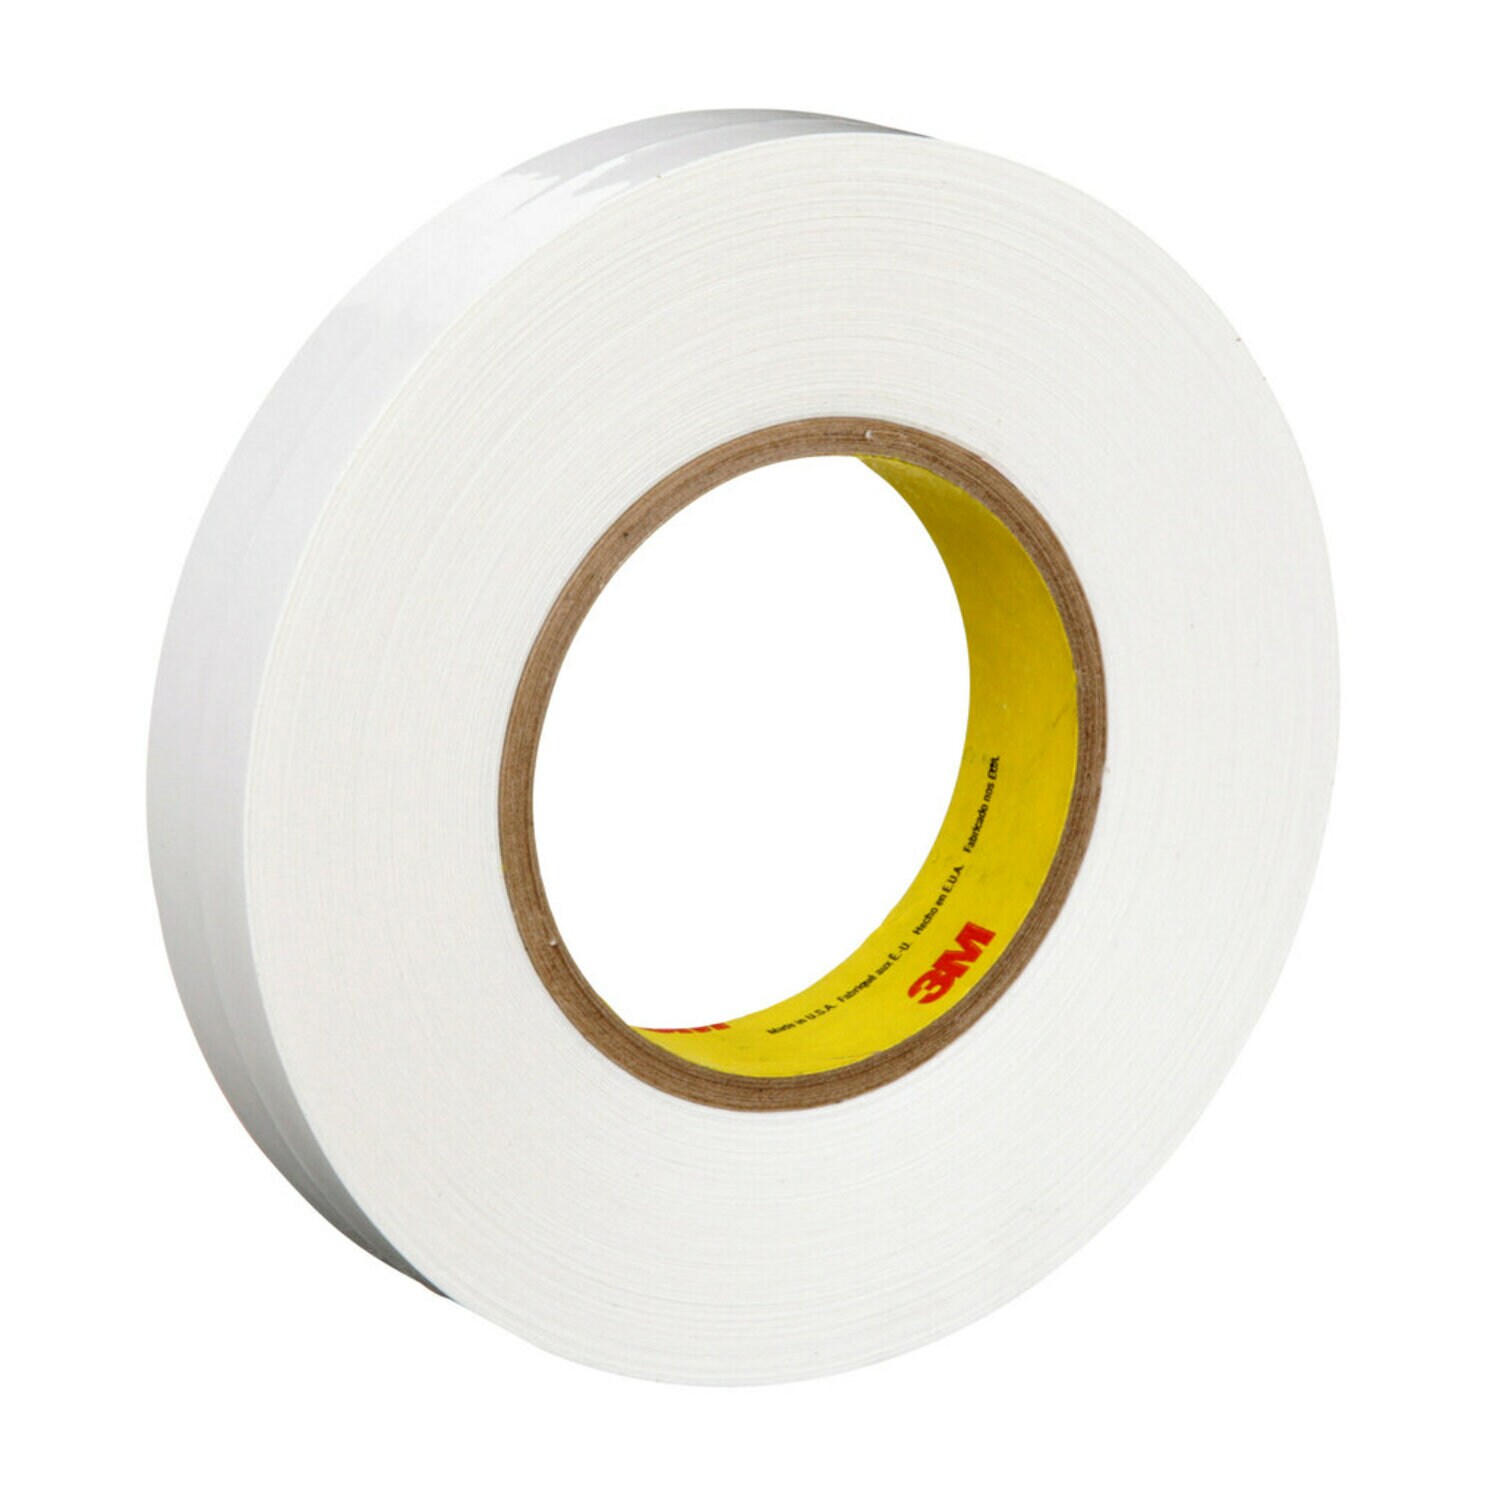 7000048460 - 3M Removable Repositionable Tape 666, Clear, 1 in x 72 yd, 3.8 mil, 36 Rolls/Case